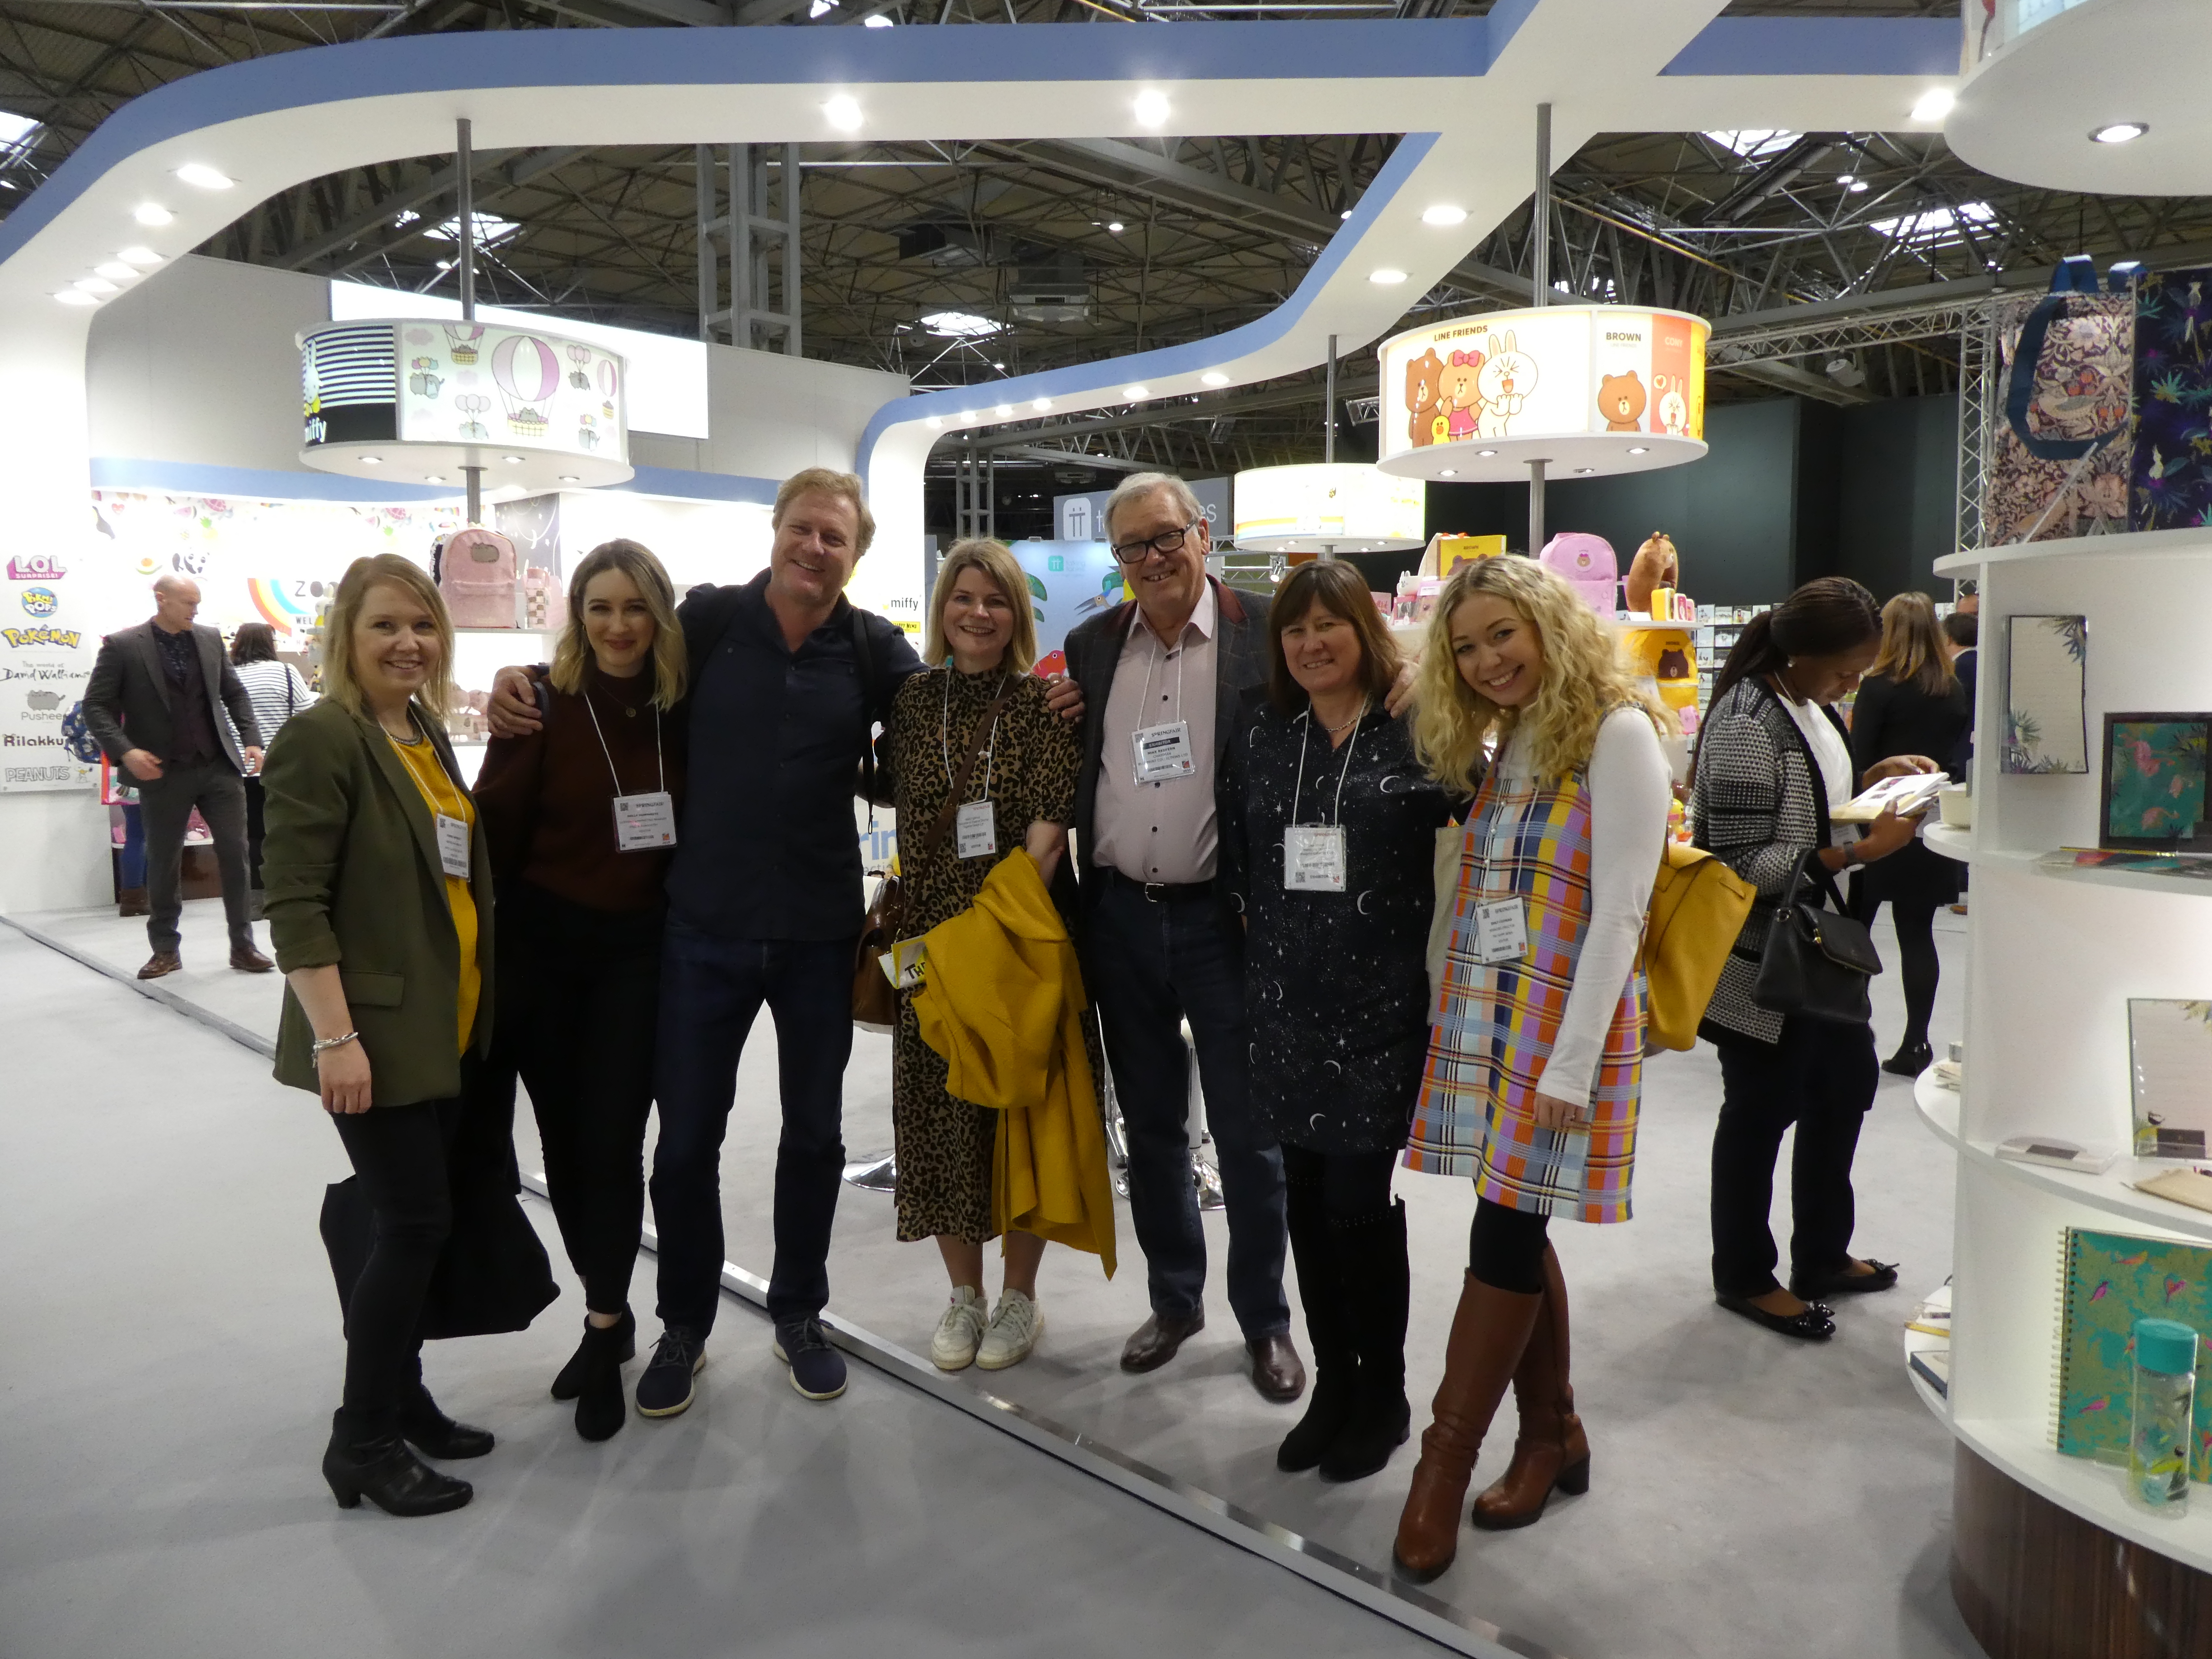 Above: A doubly ‘happy’ gathering. (Far right) Emily Coxhead, creator of The Happy News with (third left) Giles Andreae, co-creator of Happy Jackson on the Blueprint stand. 